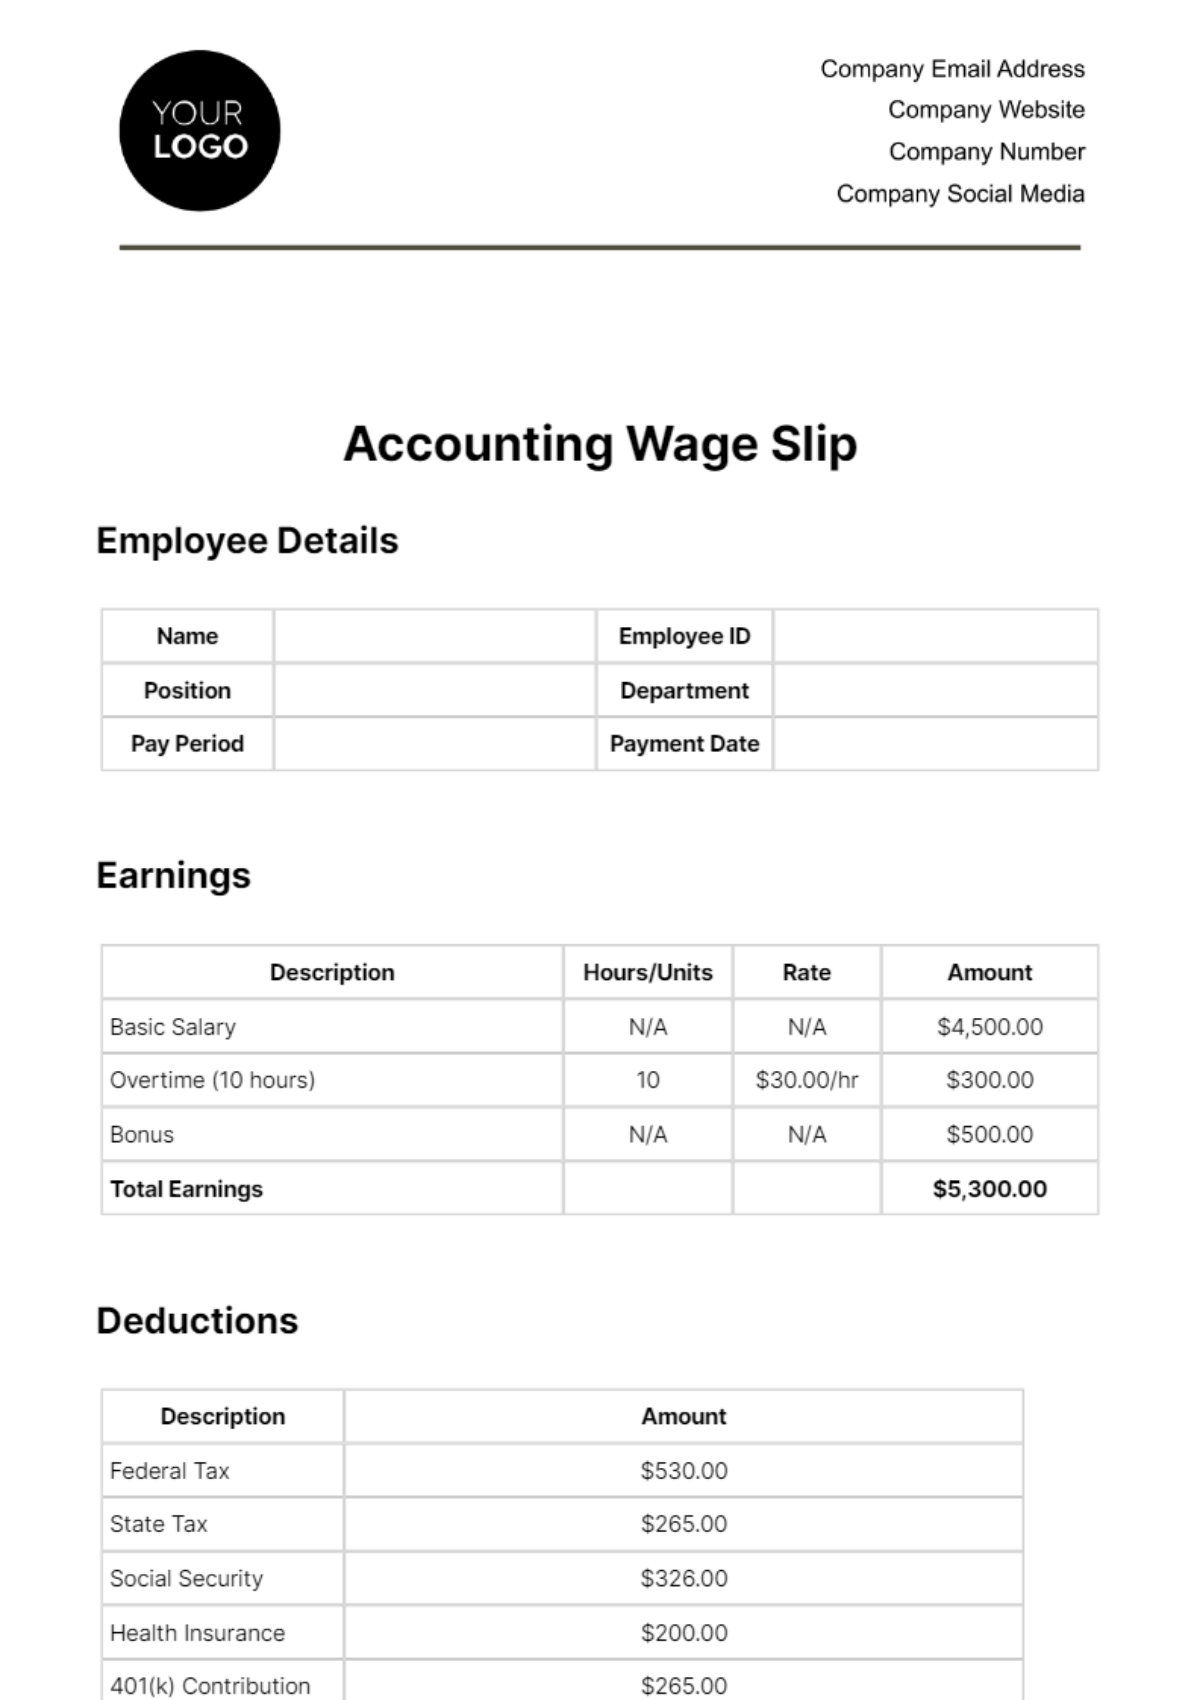 Free Accounting Wage Slip Template